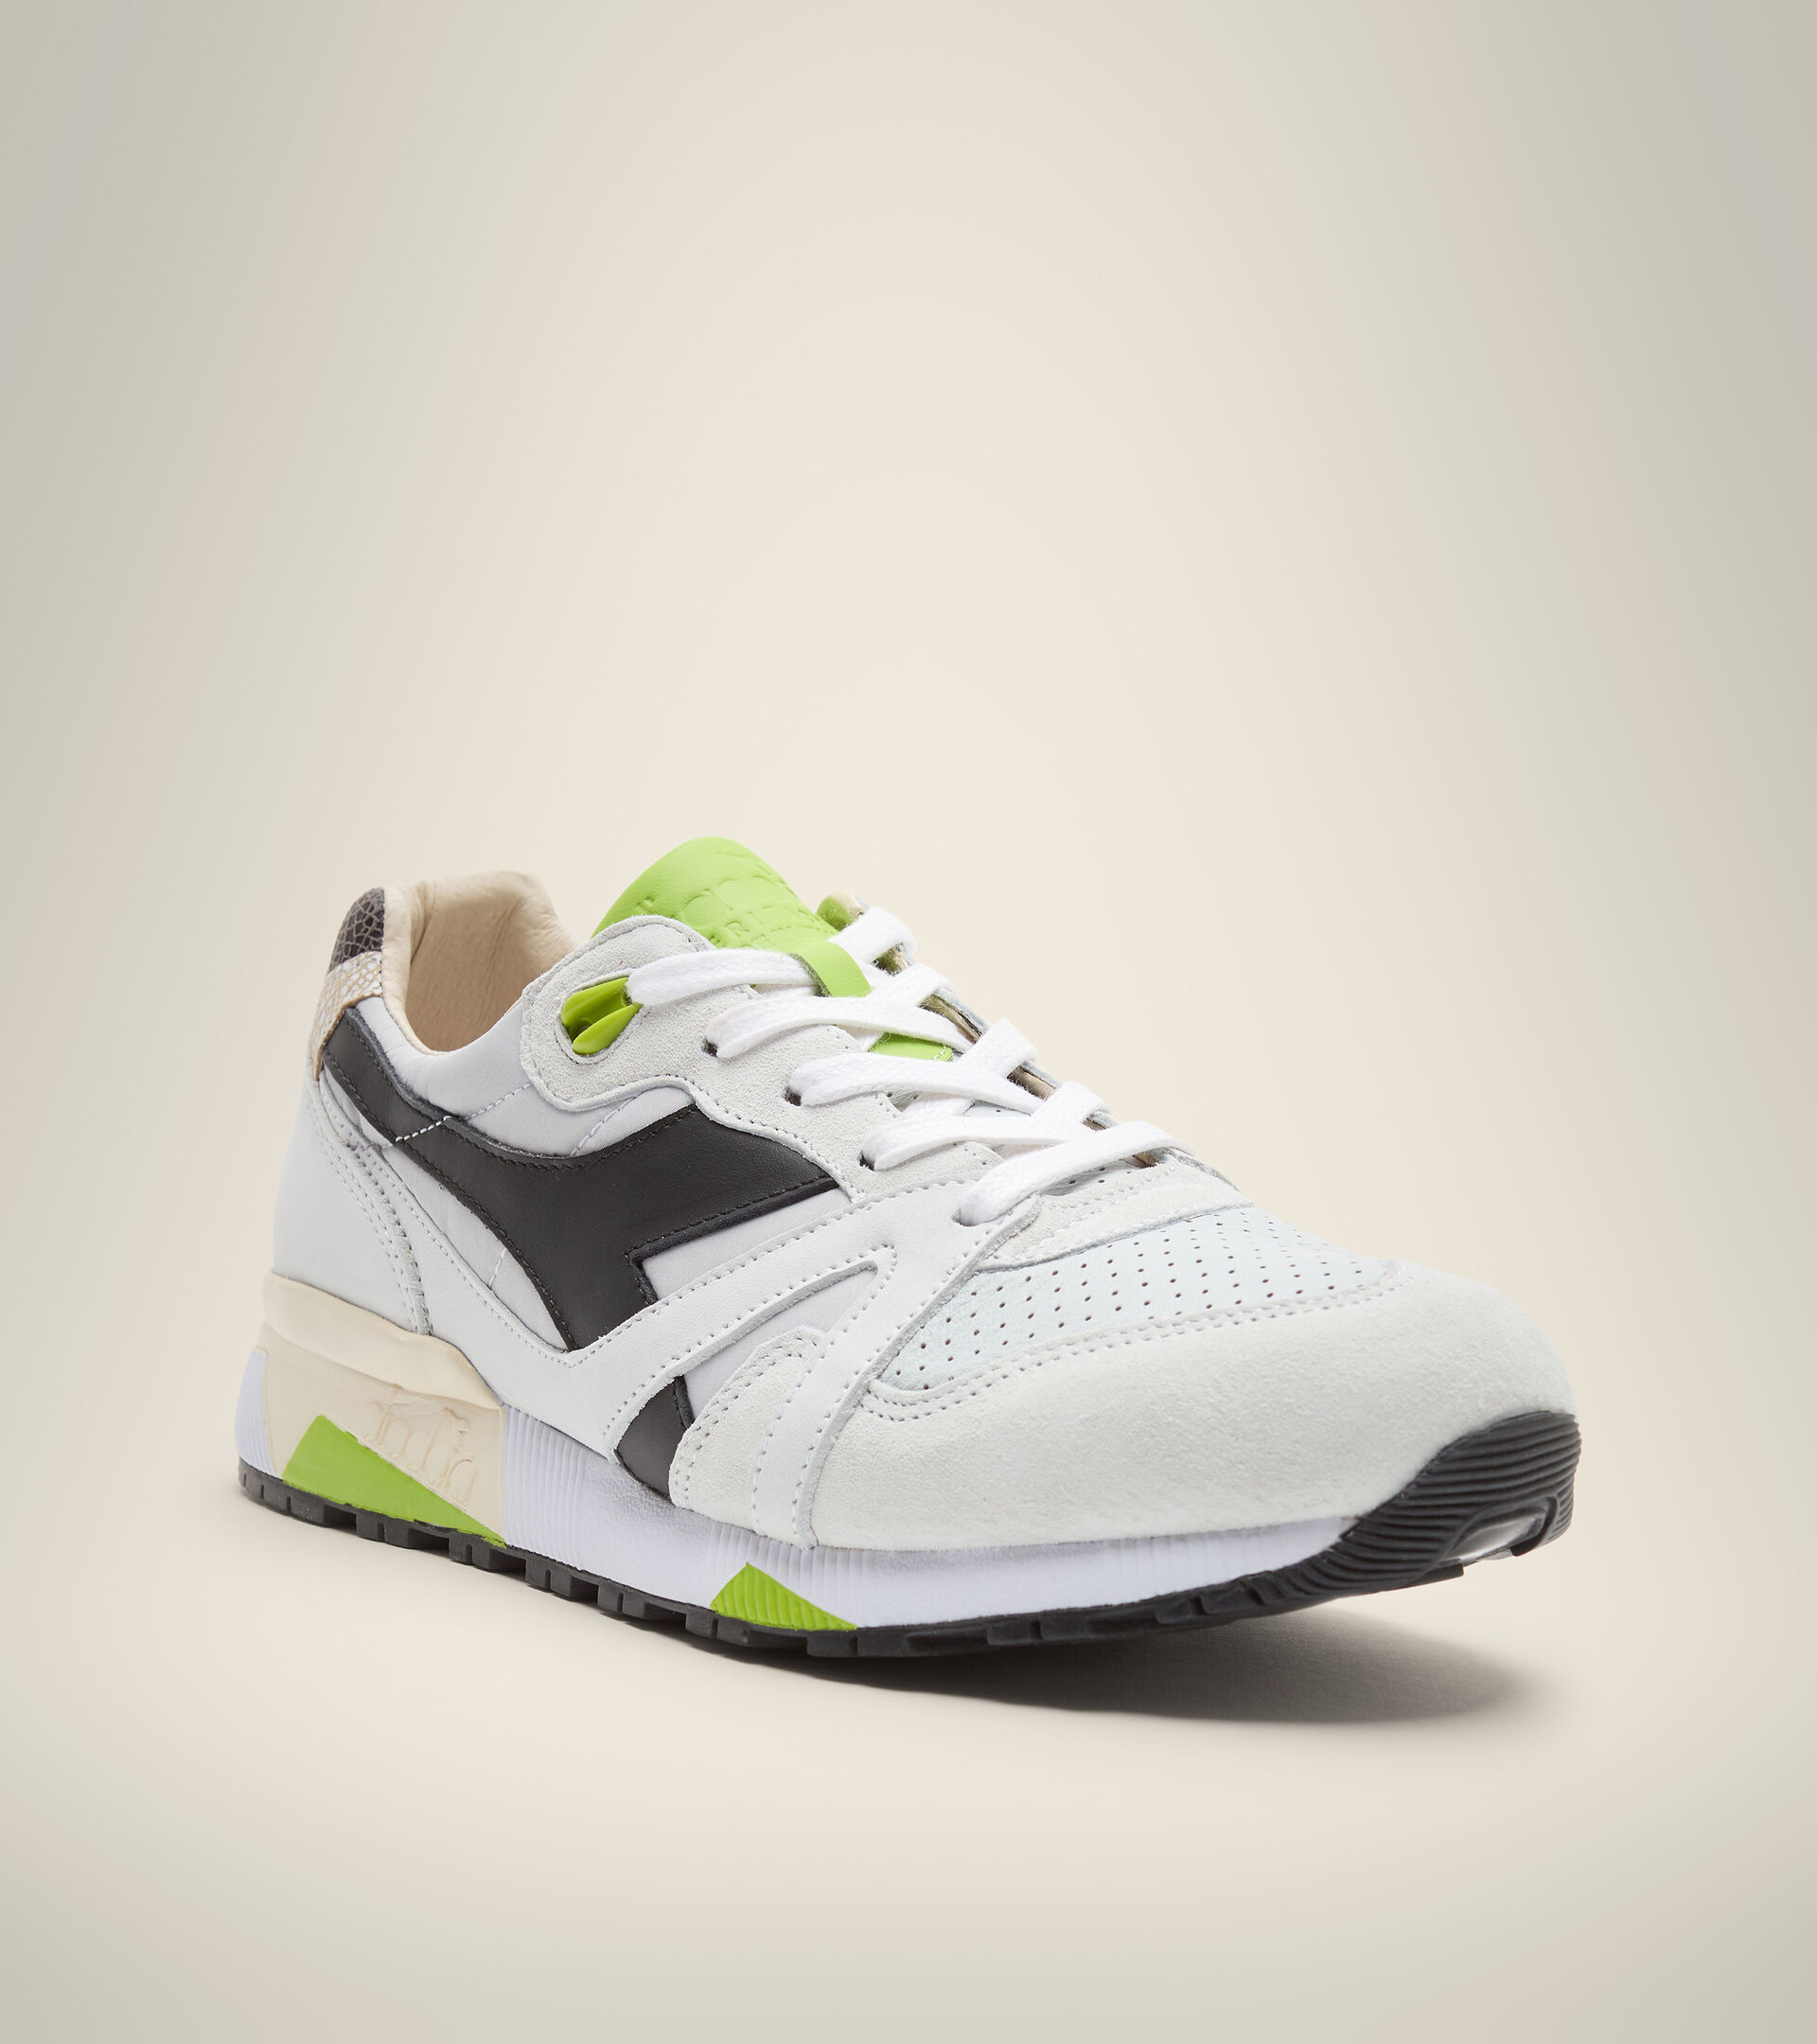 Chaussures Heritage Made in Italy - Homme N9000 ITALIA WEISS/GLETSCHER GRAU - Diadora